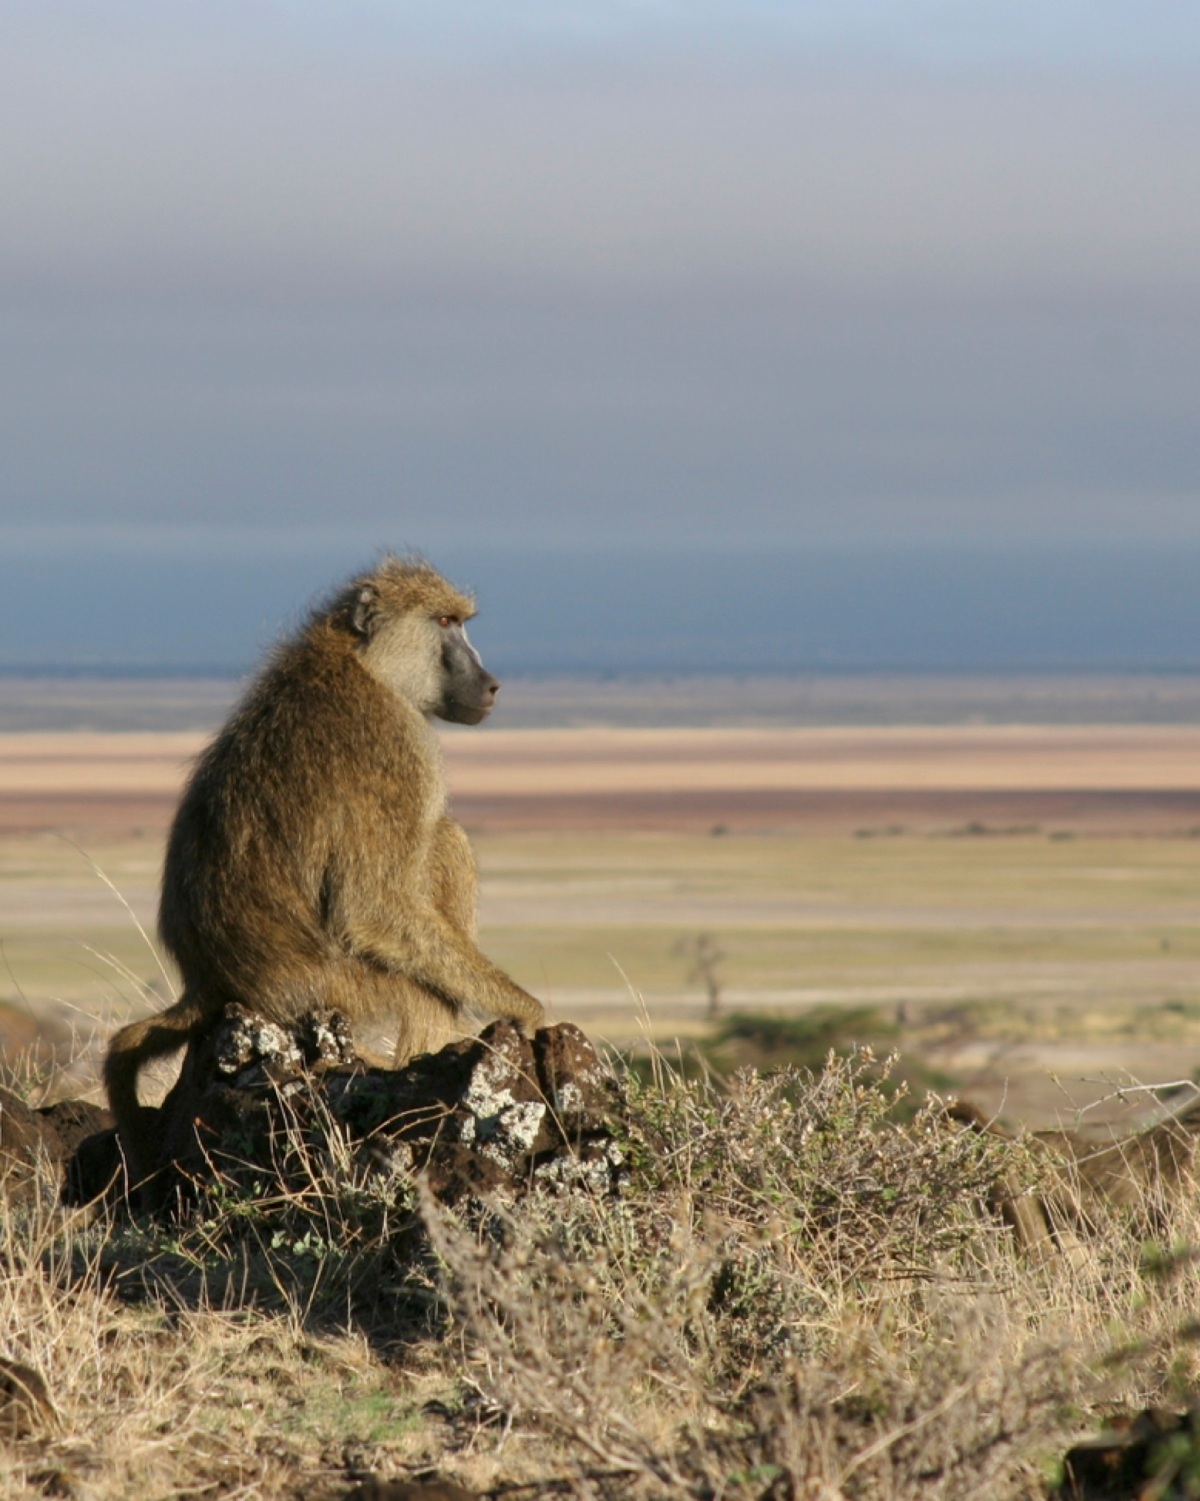 Article in focus: Group Living and Male Dispersal Predict the Core Gut Microbiome in Wild Baboons